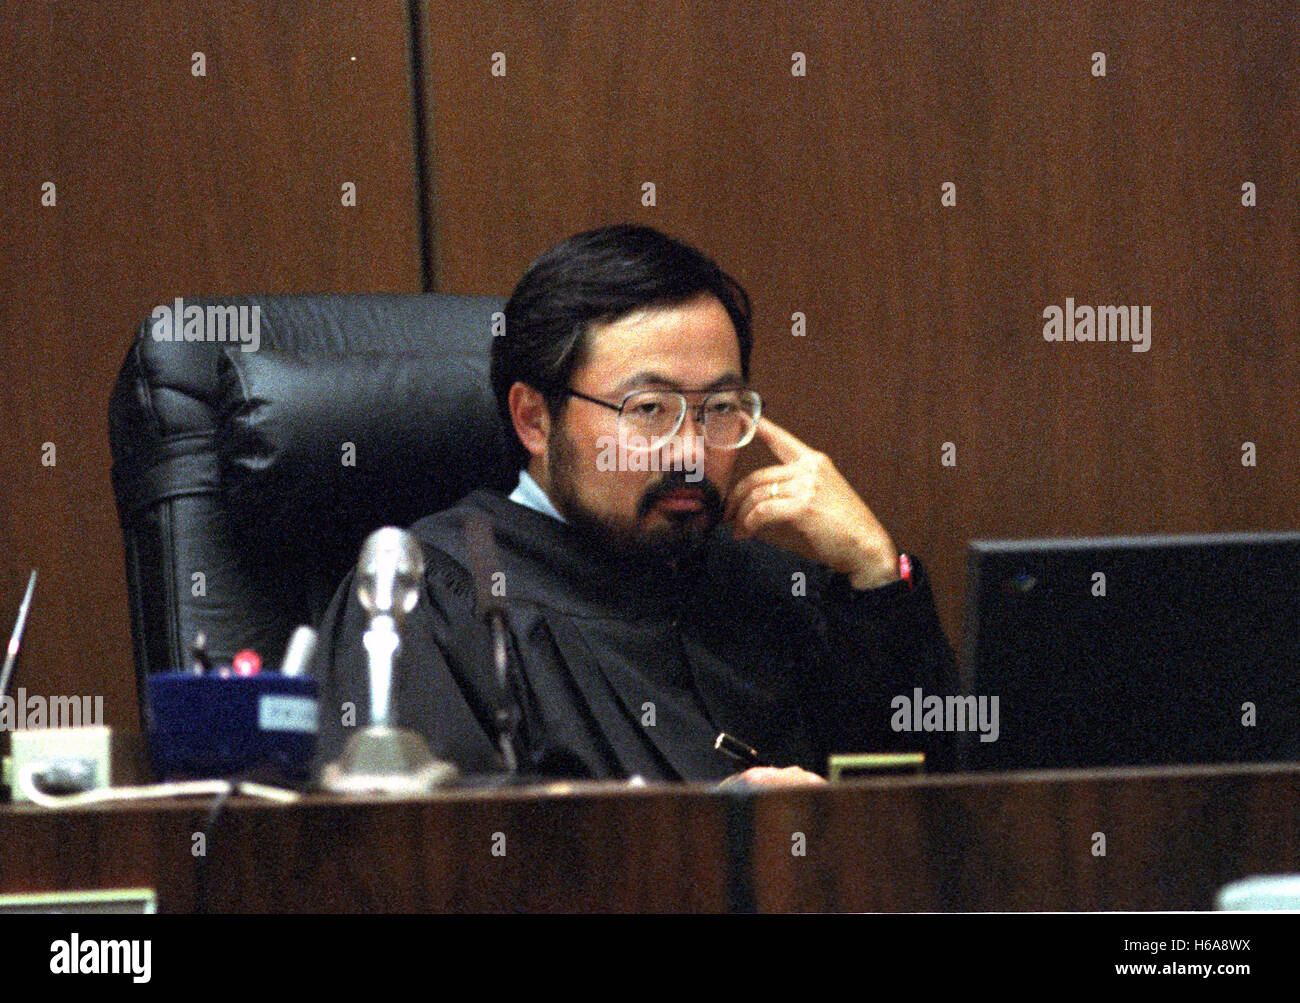 Los Angeles, California, USA. 13th July, 1995. Superior Court Judge Lance Ito presides during the trial of former NFL star running back O.J. Simpson for the murder of his former wife, Nicole Brown Simpson and a friend of hers, restaurant waiter, Ron Goldman in Los Angeles County Superior Court in Los Angeles, California on July 13, 1995.Credit: Steve Grayson/Pool via CNP © Steve Grayson/CNP/ZUMA Wire/Alamy Live News Stock Photo